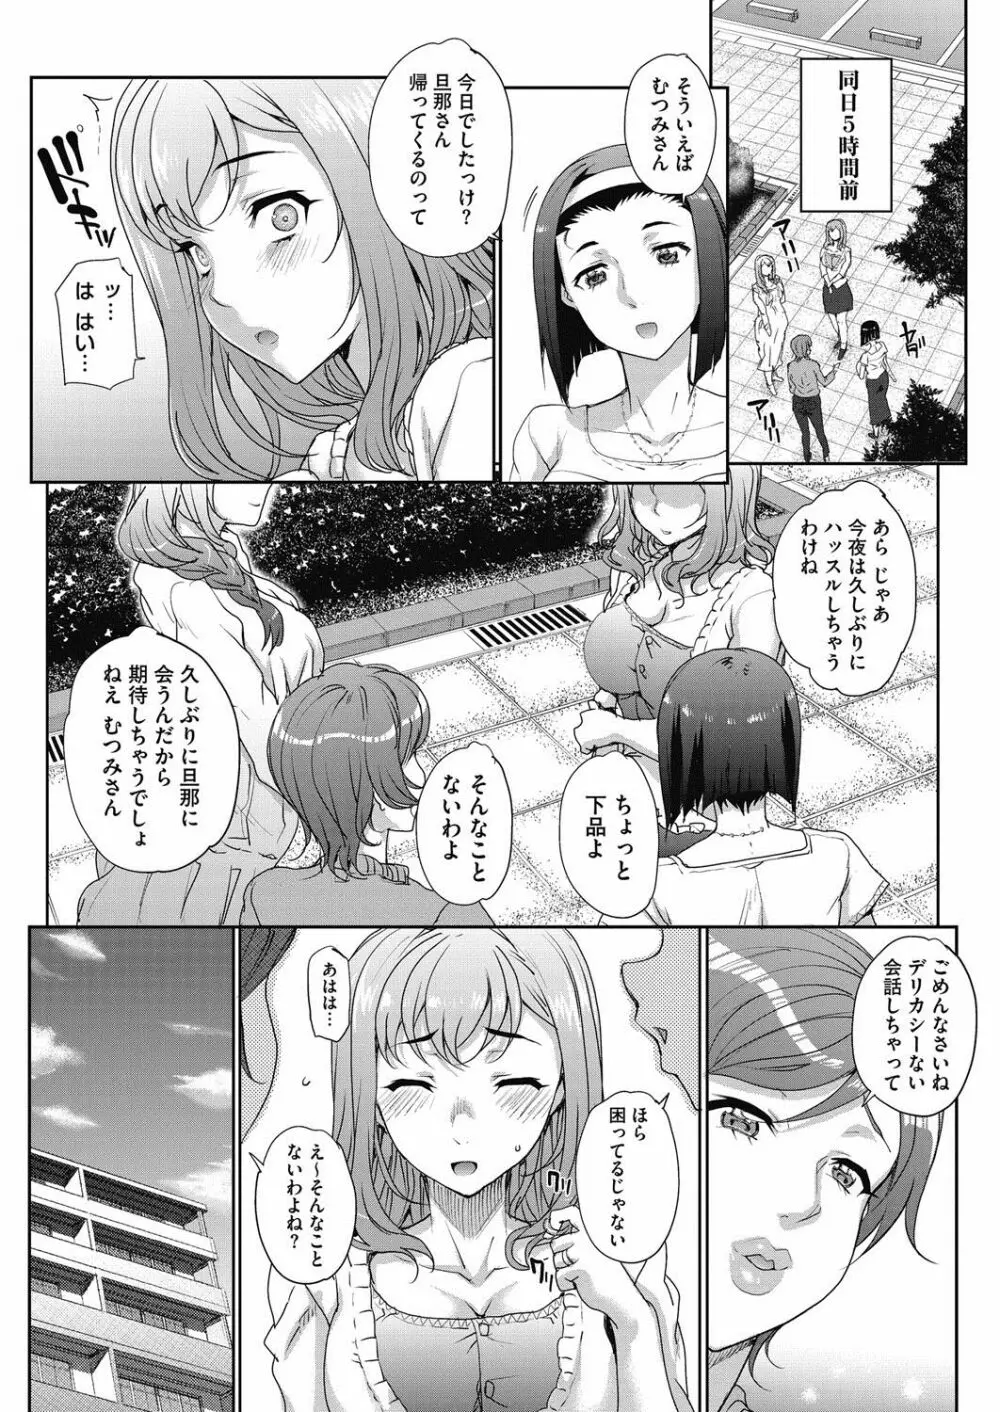 [Carn] Tanshinfunin ~Sisters~ Ch 1-7 26ページ